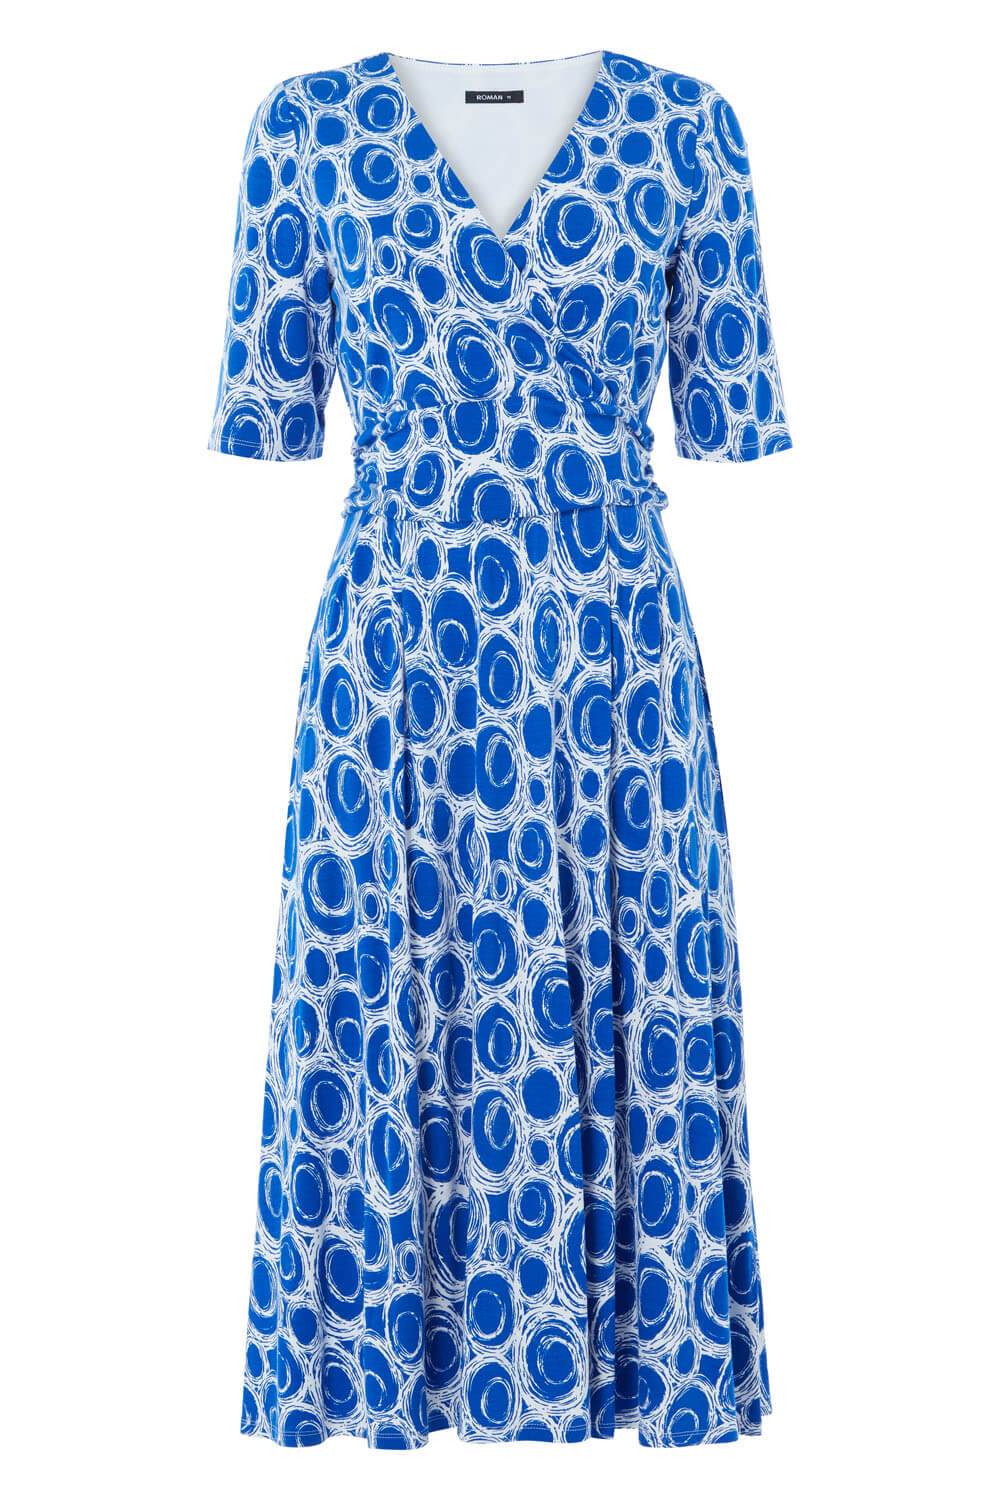 Royal Blue Spot Printed Fit and Flare Dress, Image 5 of 5